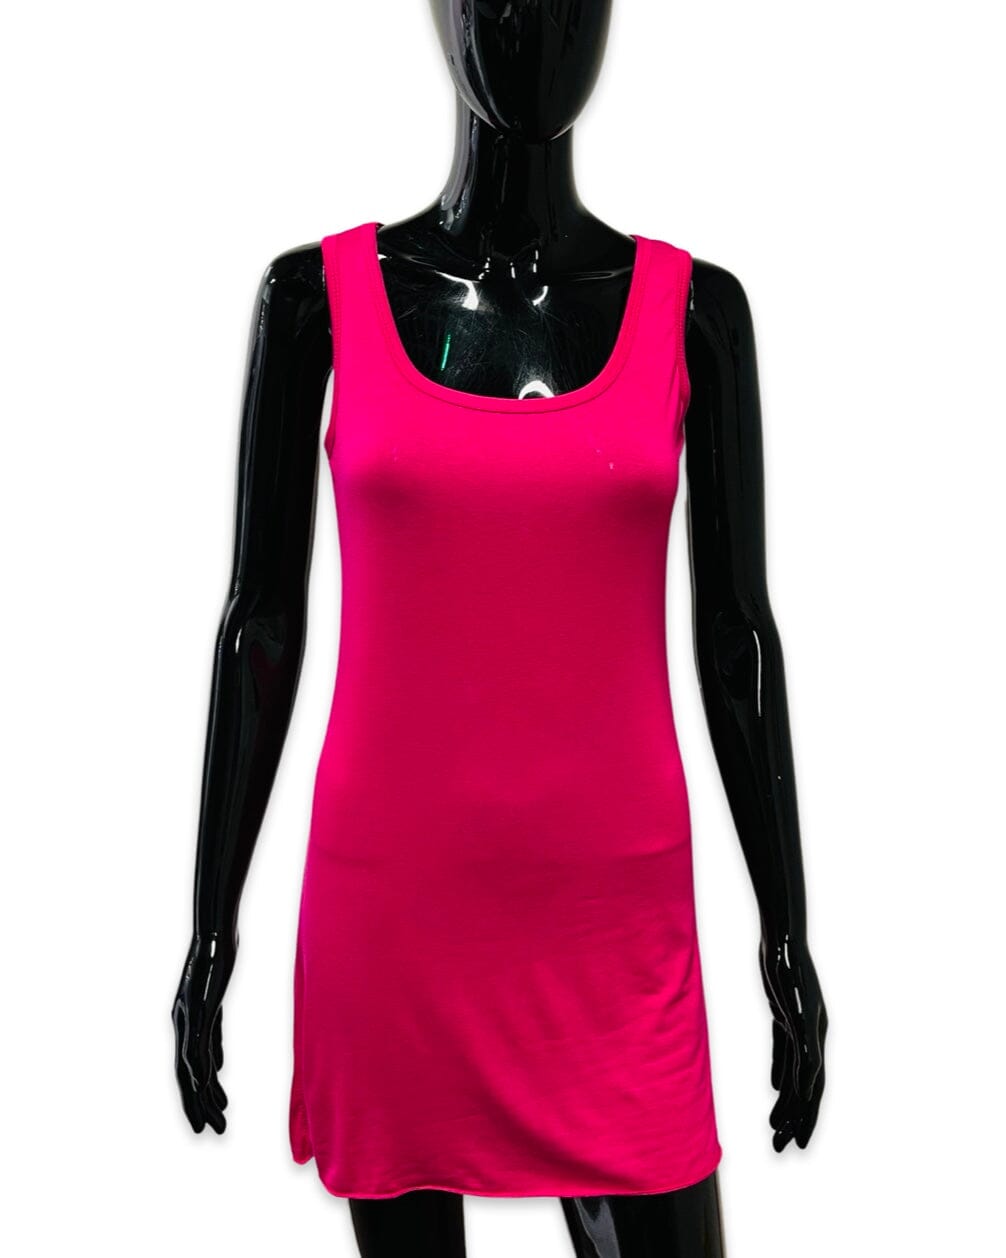 The Essential RILEY "Magic" Vest-Hot Pink